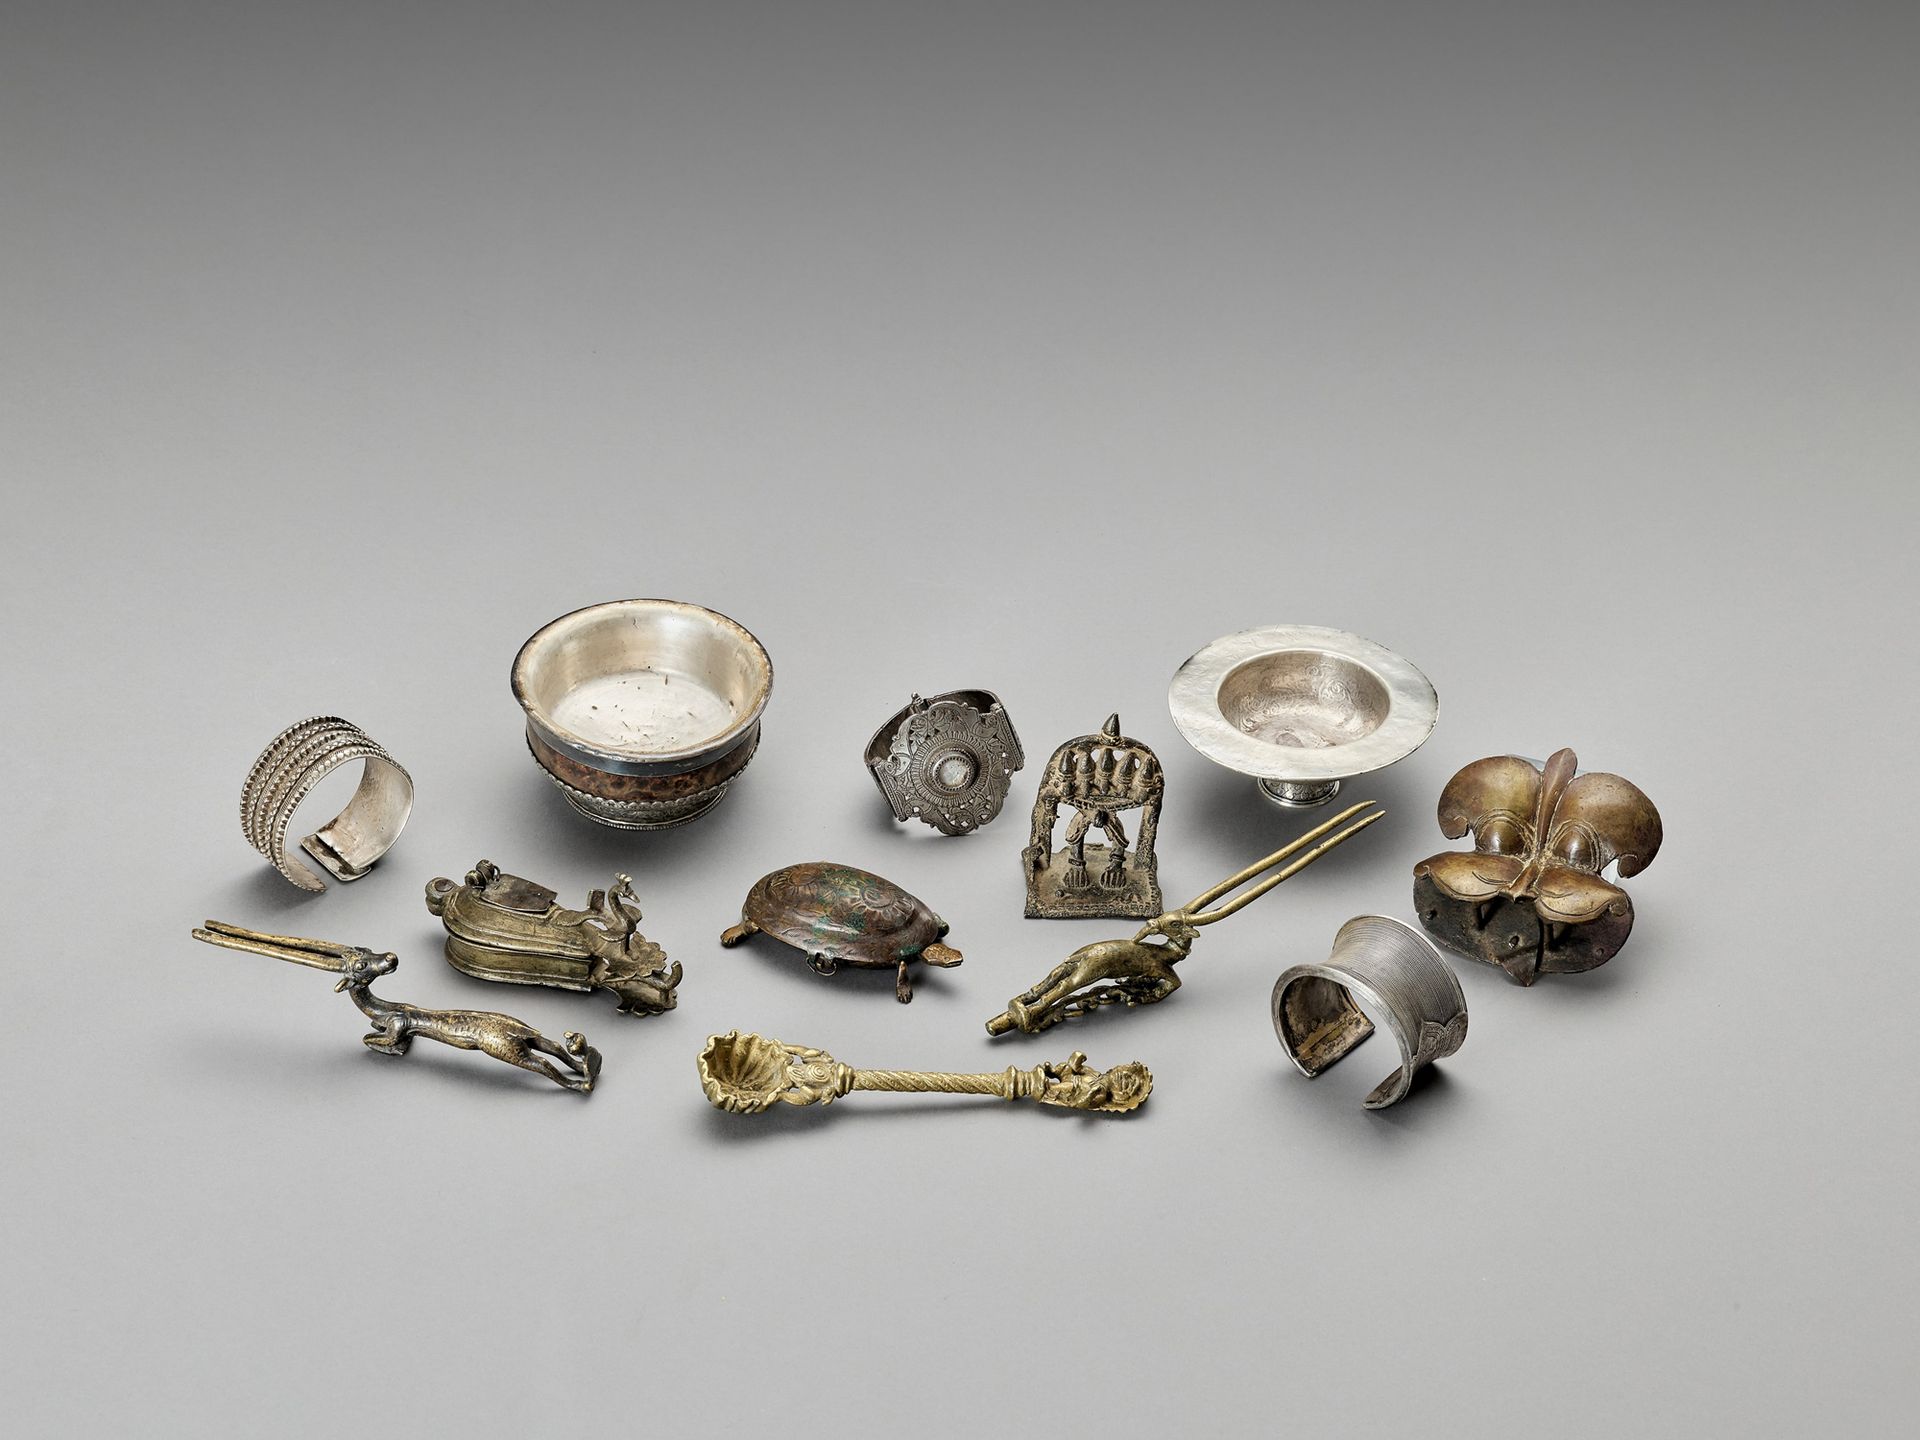 AN INTERESTING GROUP OF 12 METAL OBJECTS AN INTERESTING GROUP OF 12 METAL OBJECT&hellip;